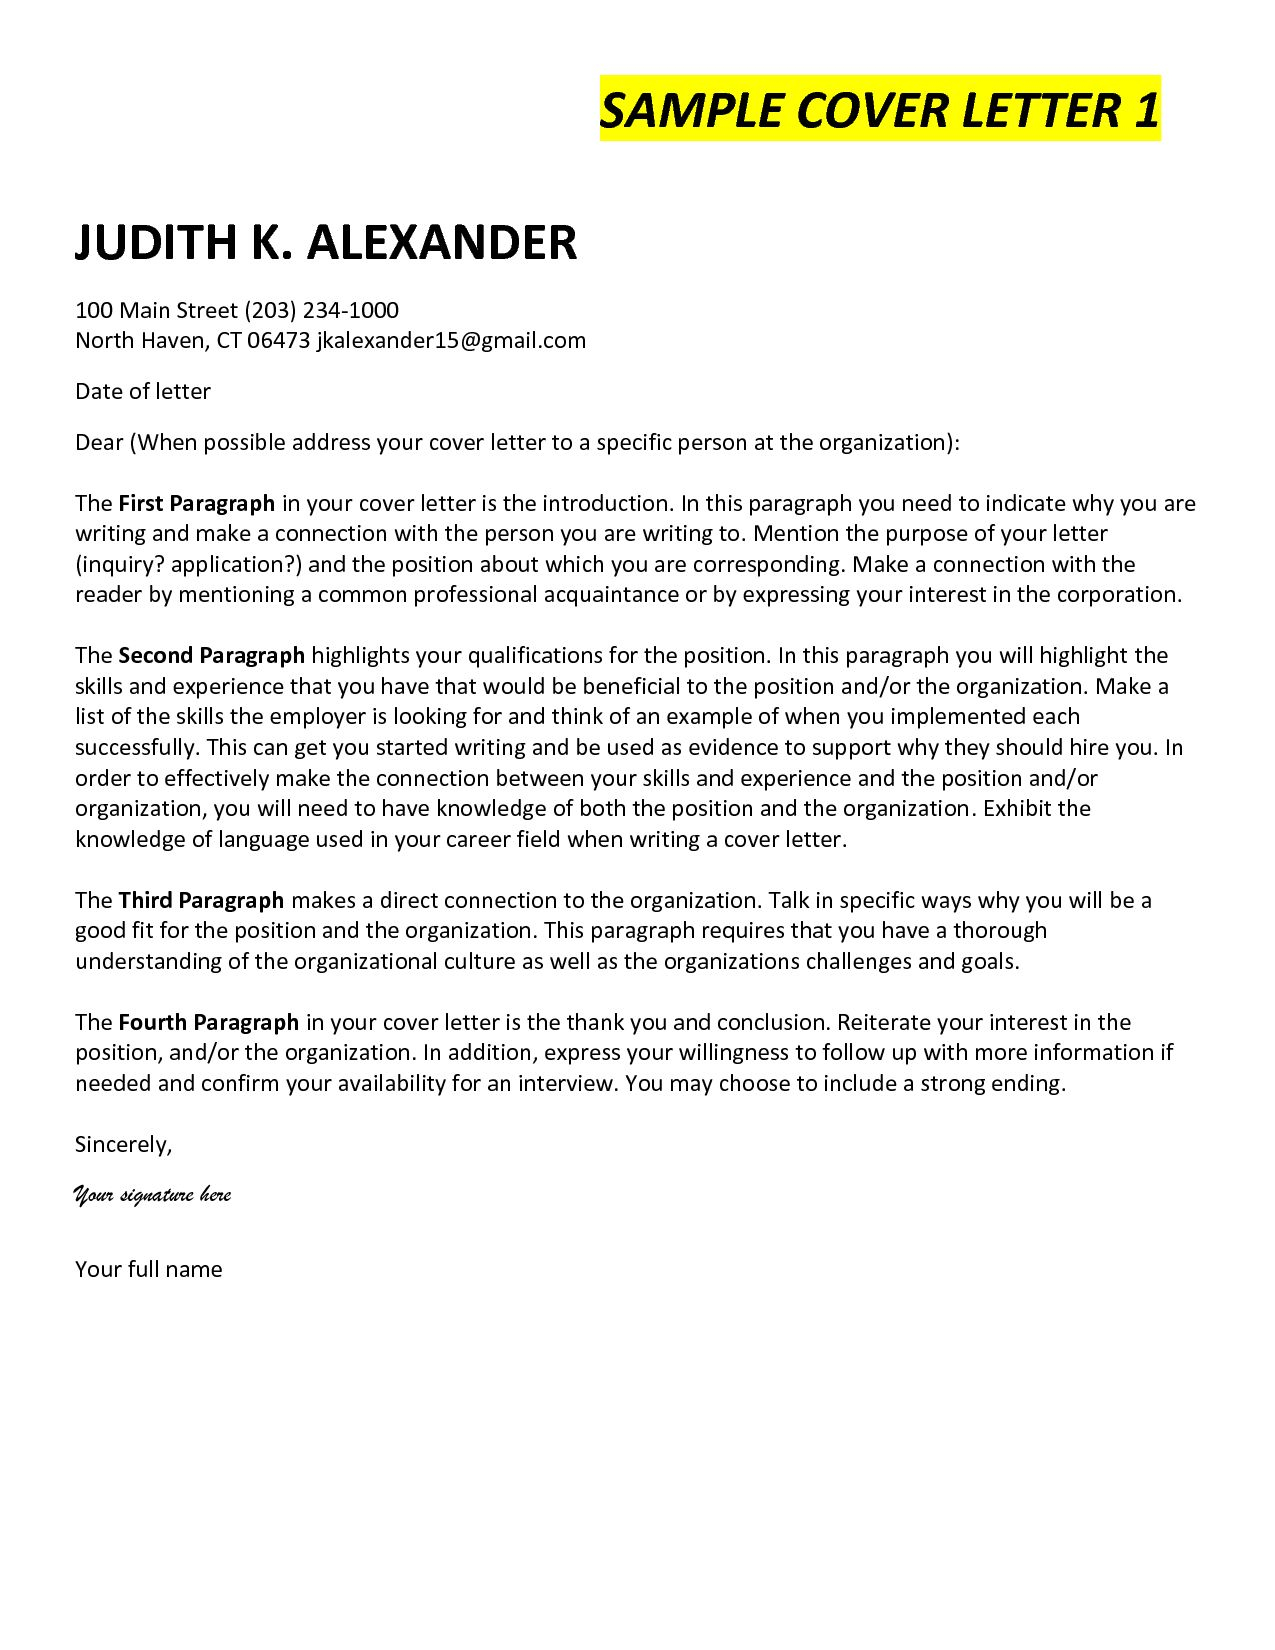 25 Cover Letter Ending Cover Letter Cover Letter For intended for proportions 1275 X 1650